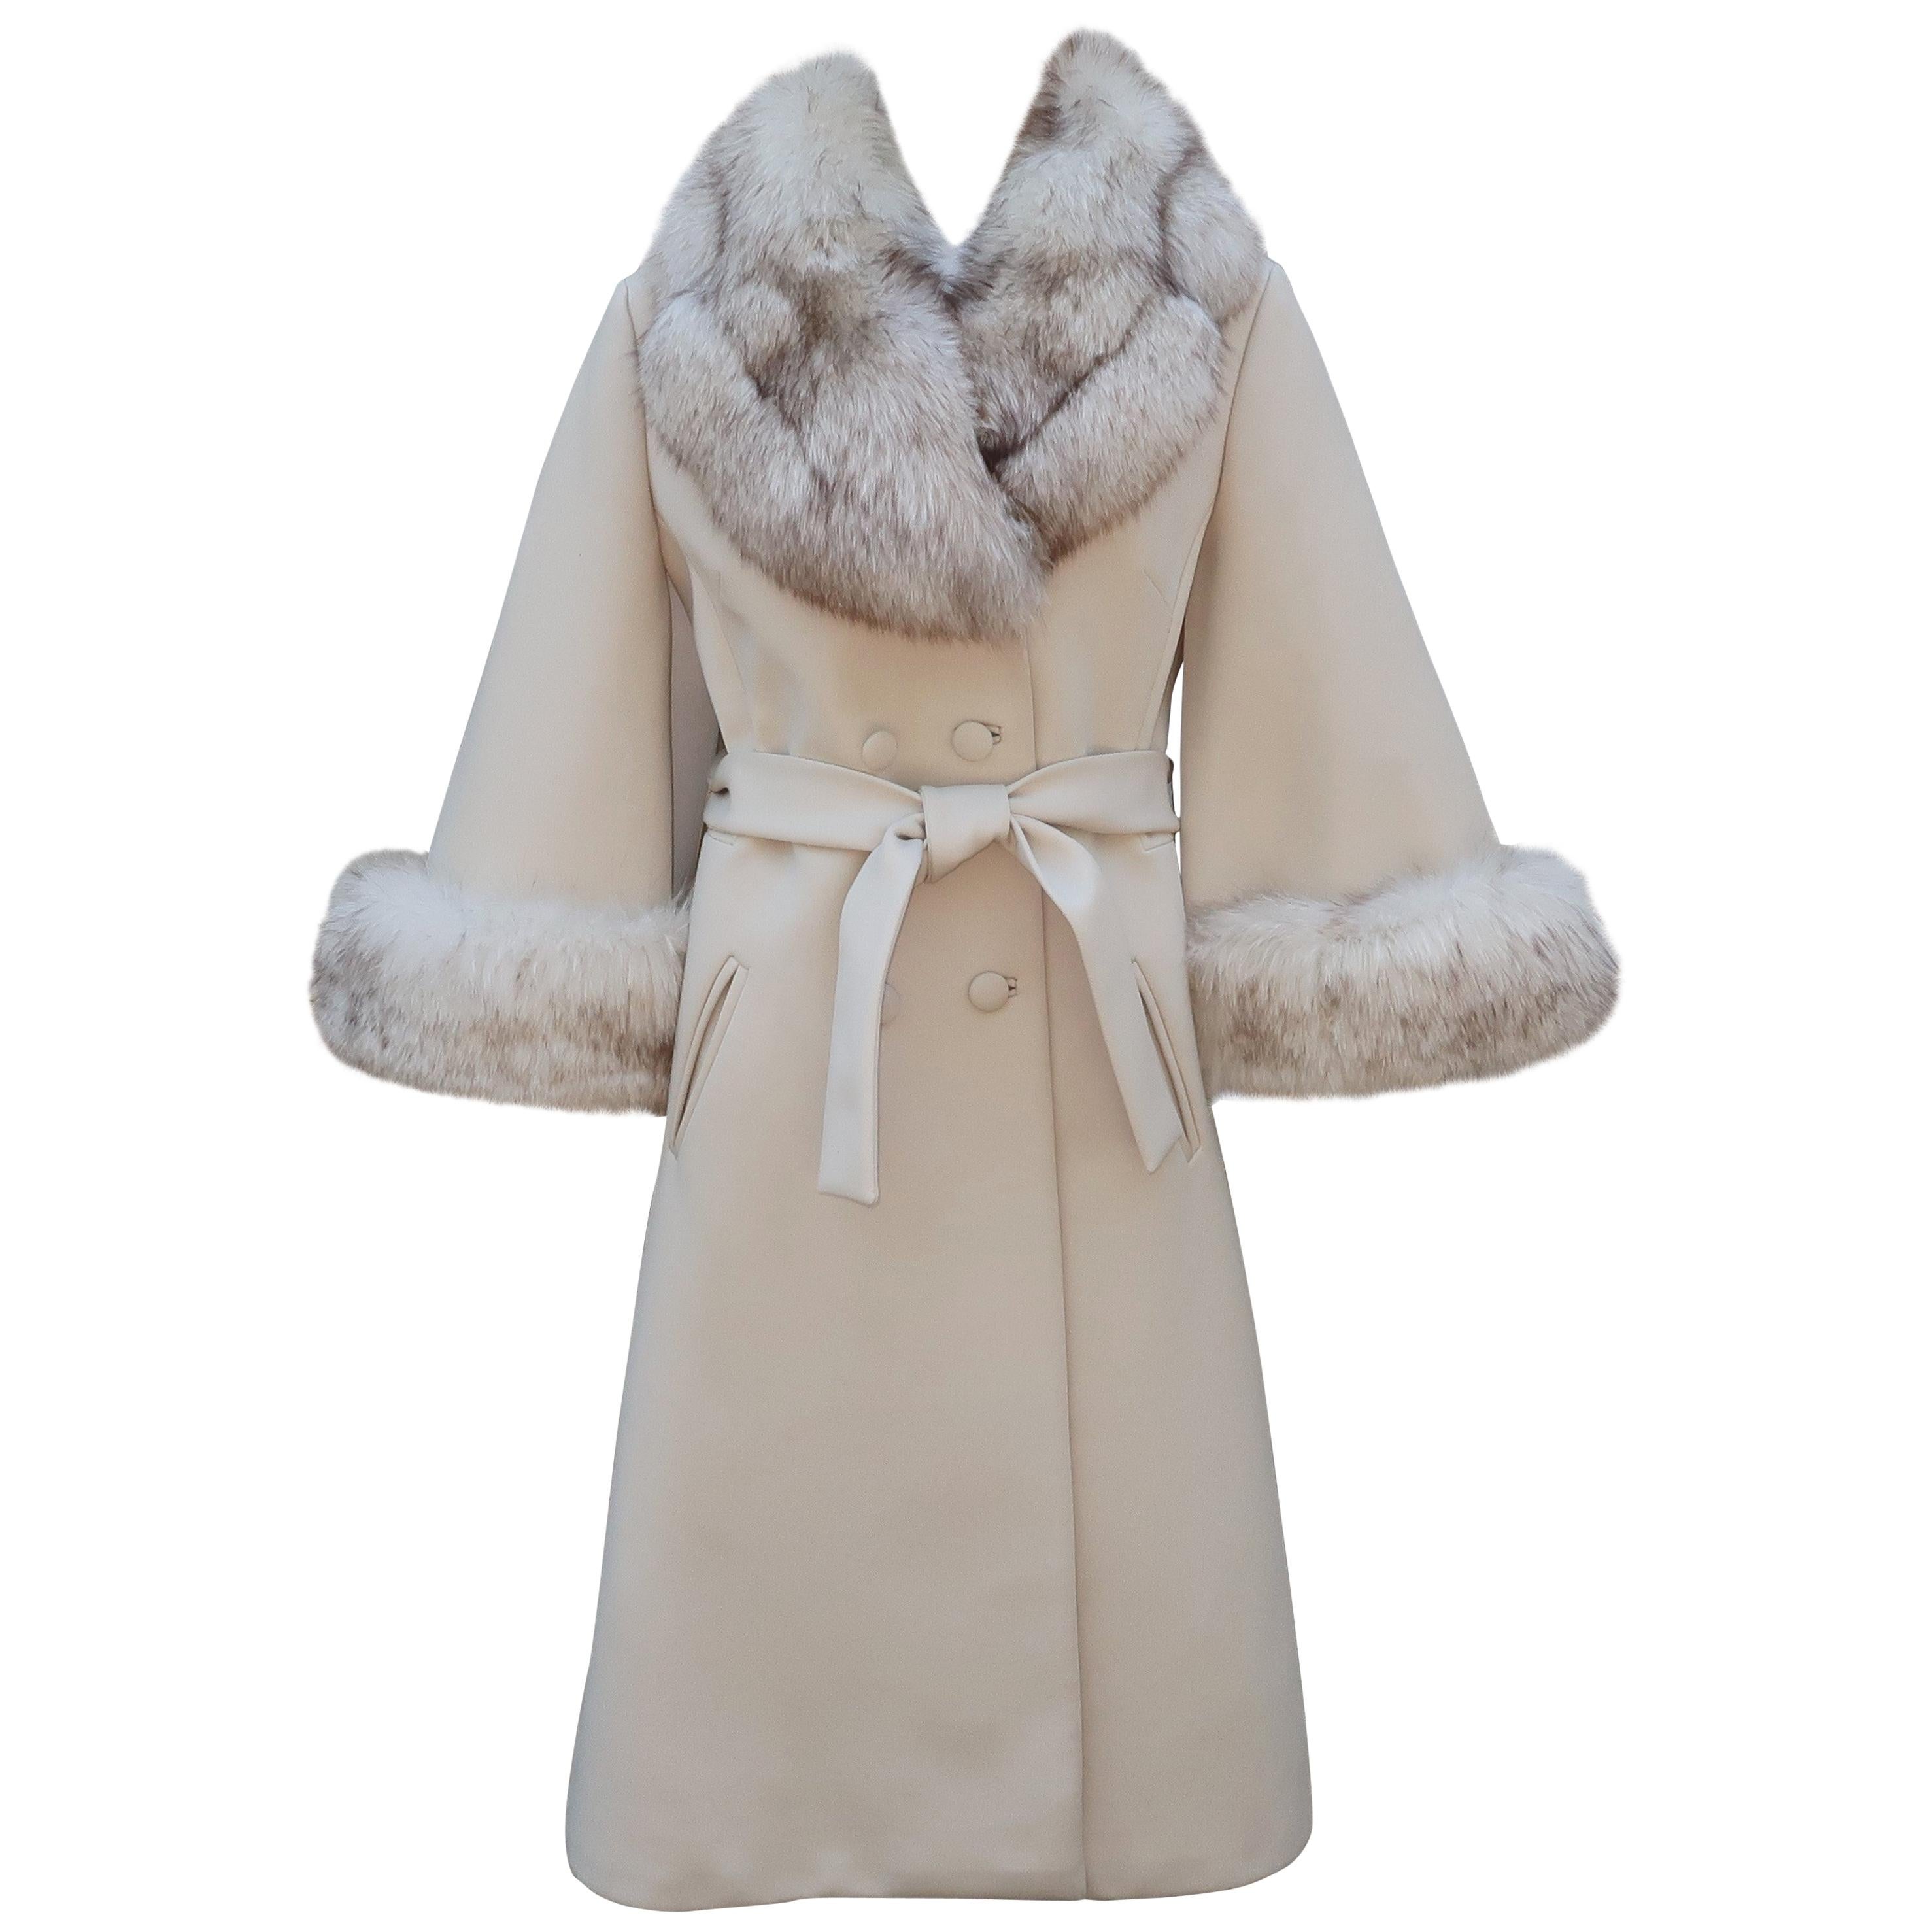 Vintage Coat With Fur Collar And Cuffs - 2 For Sale on 1stDibs